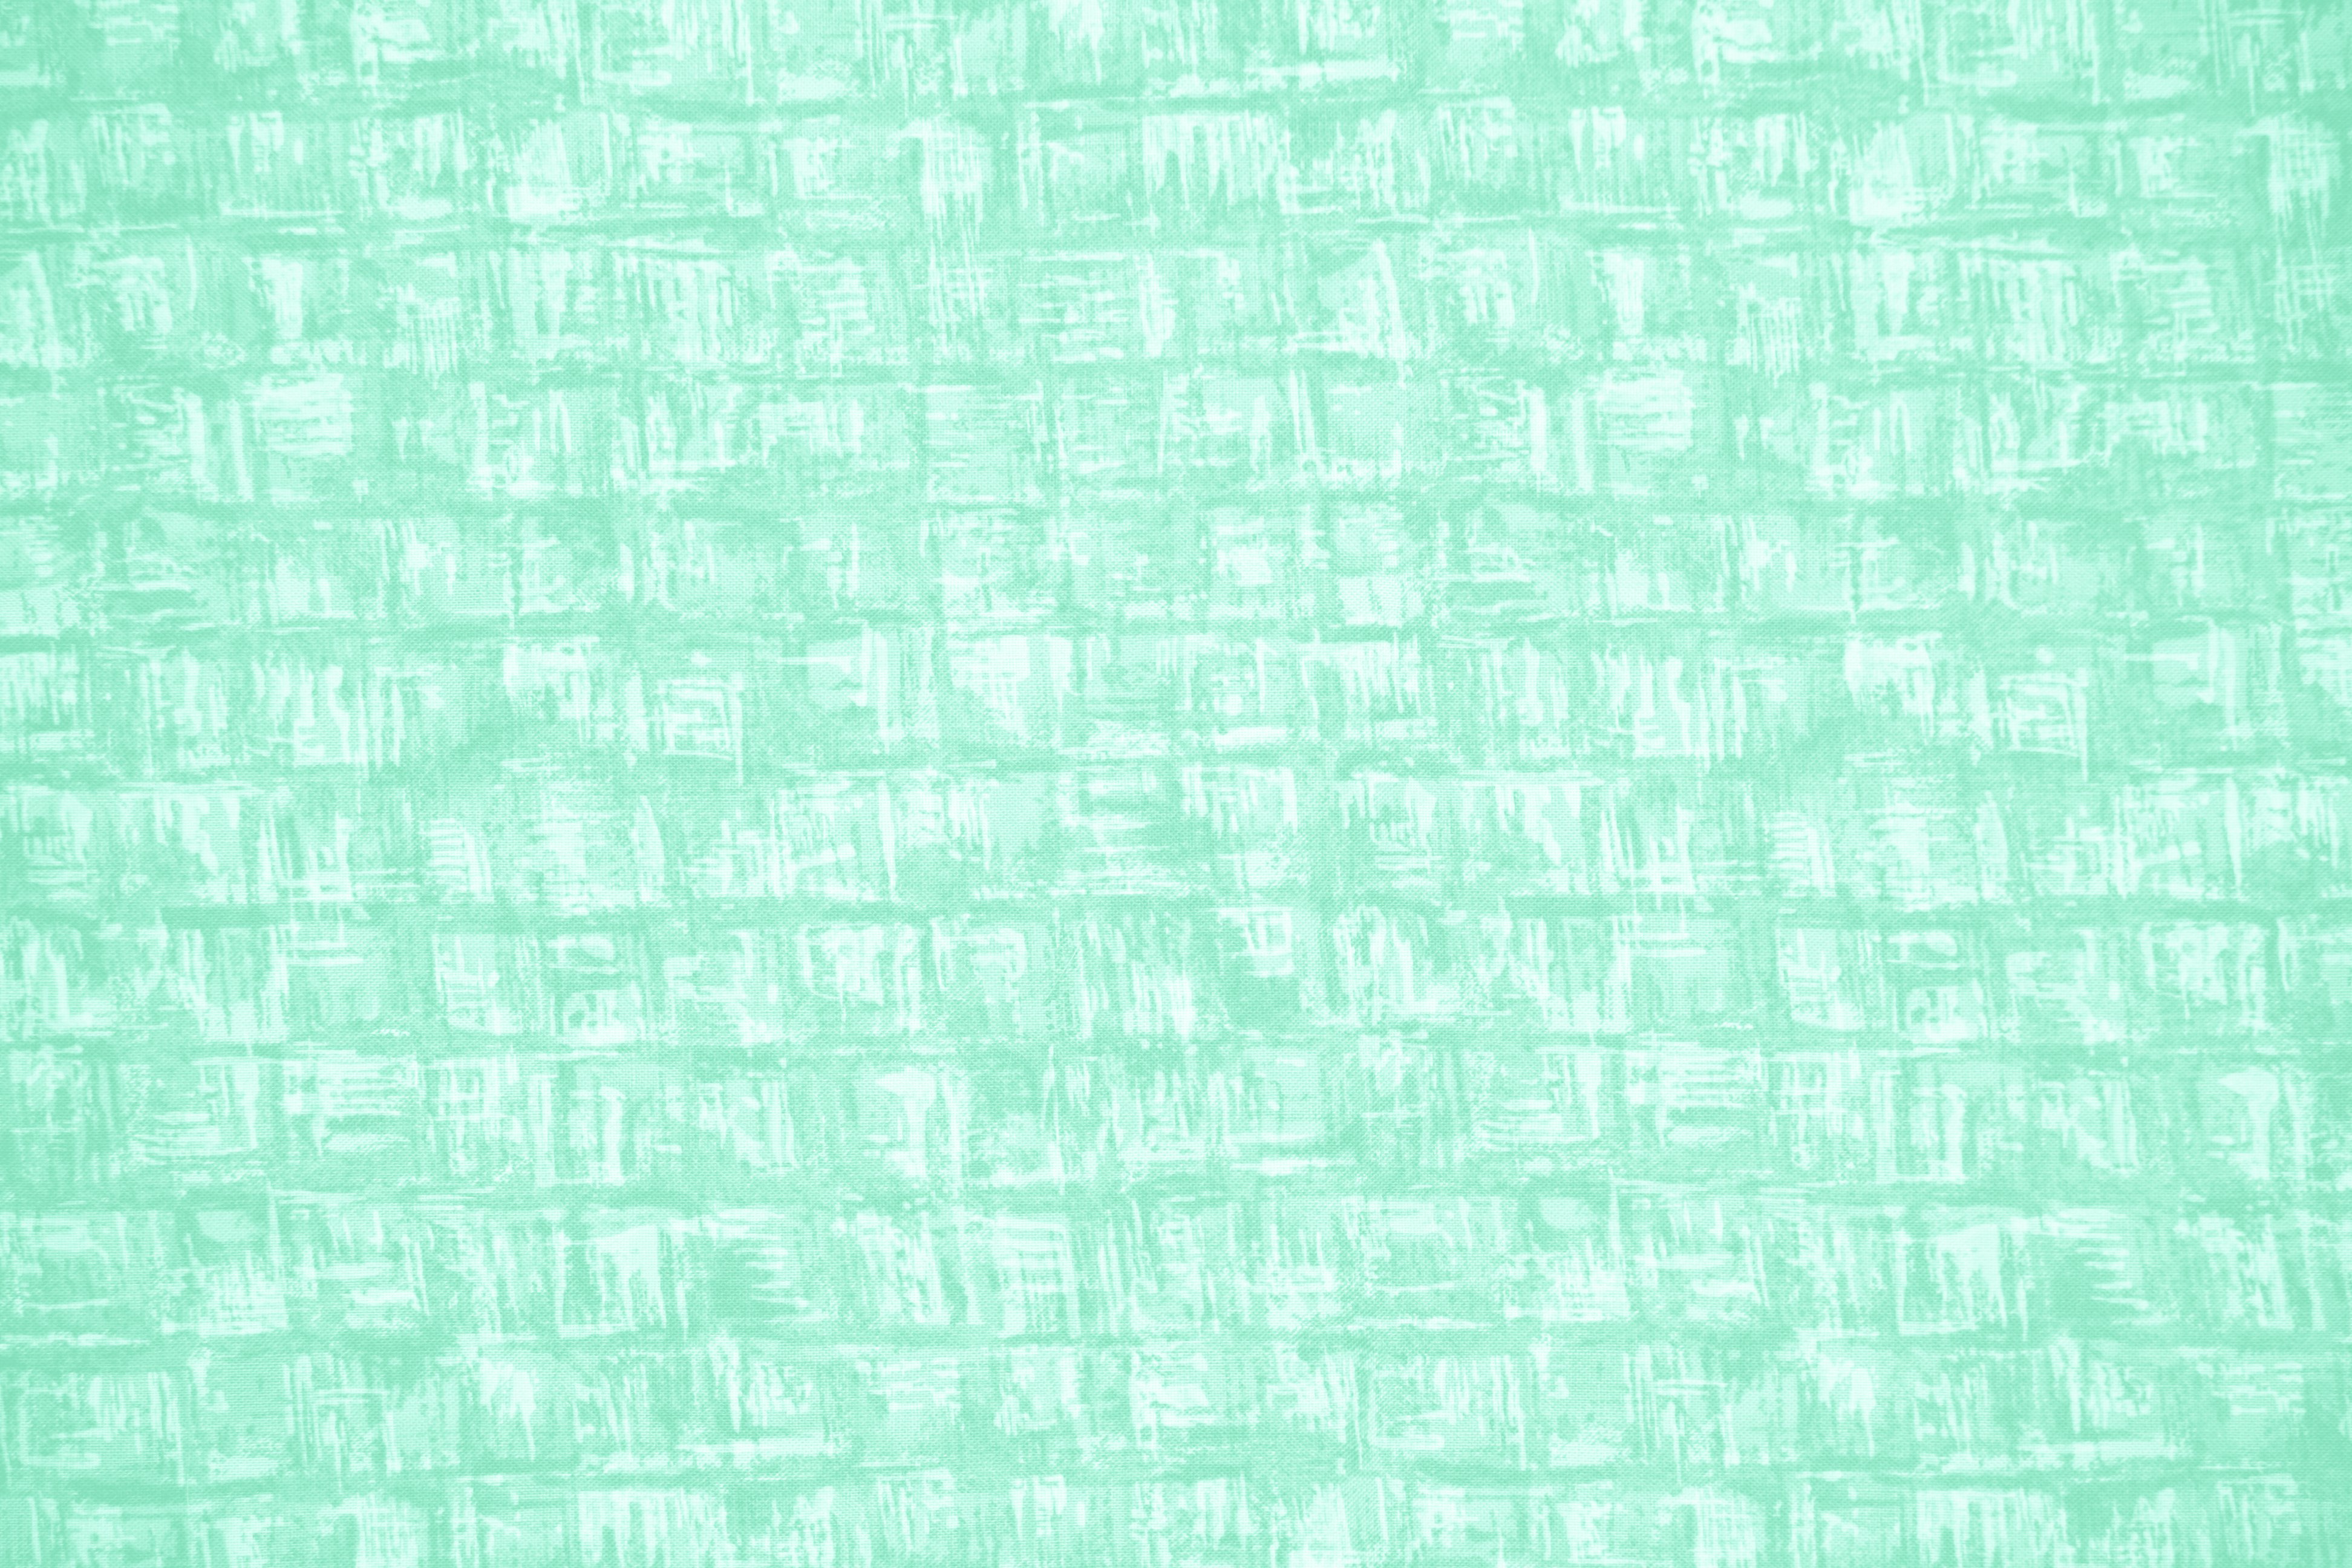 Mint Green Abstract Squares Fabric Texture Picture Free Photograph